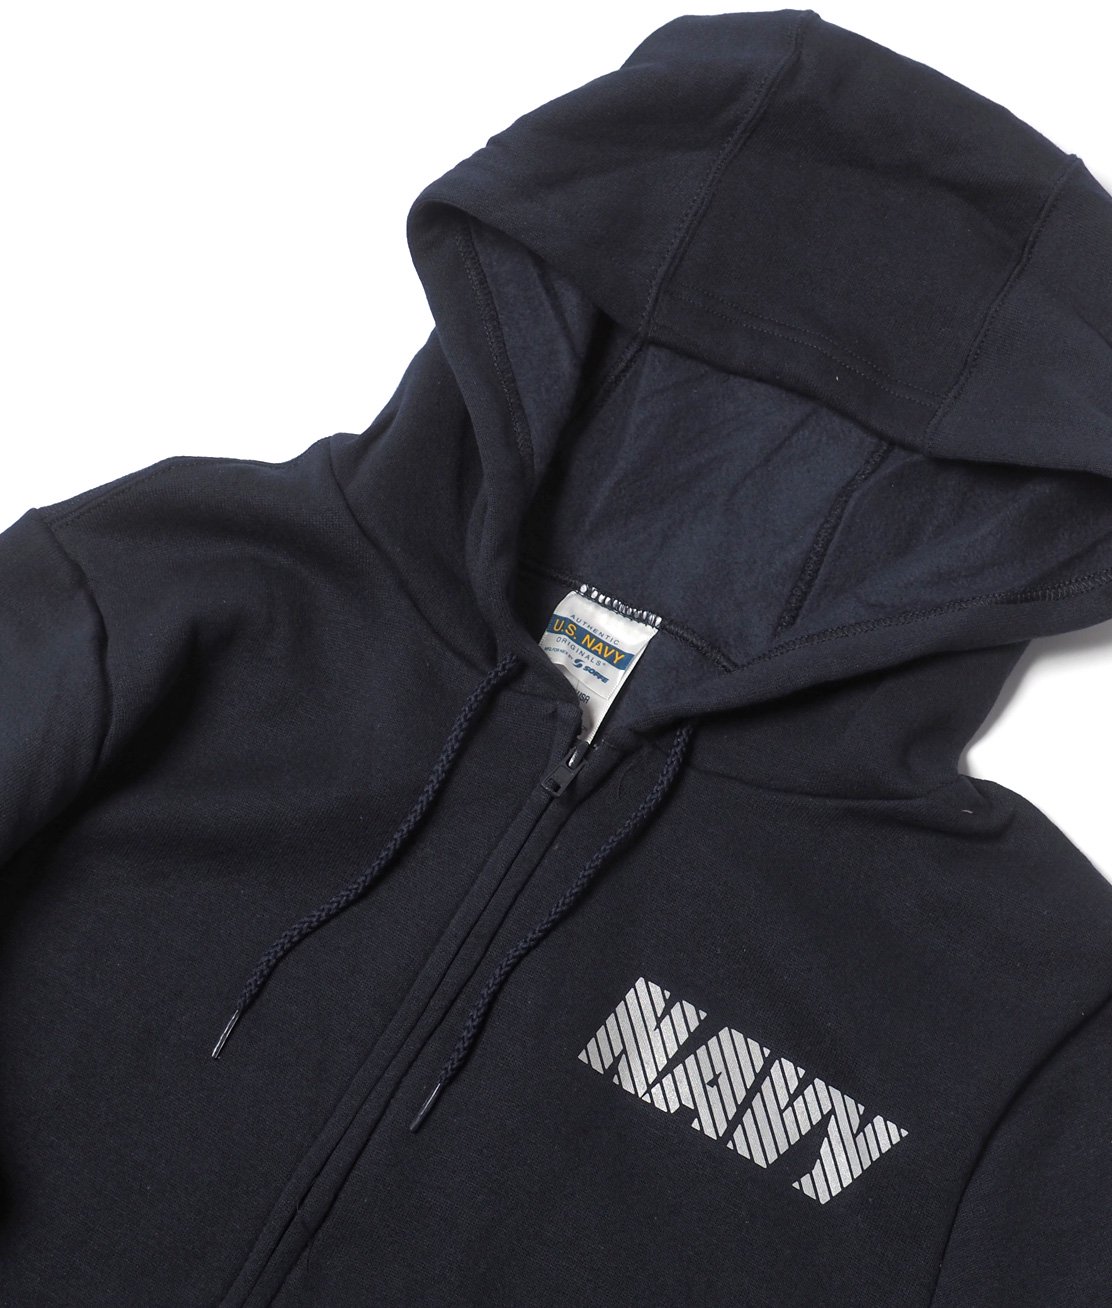 US MILITARY】US NAVY PT ZIP HOODIE BY SOFFE - NAVY 米軍 ジップ 